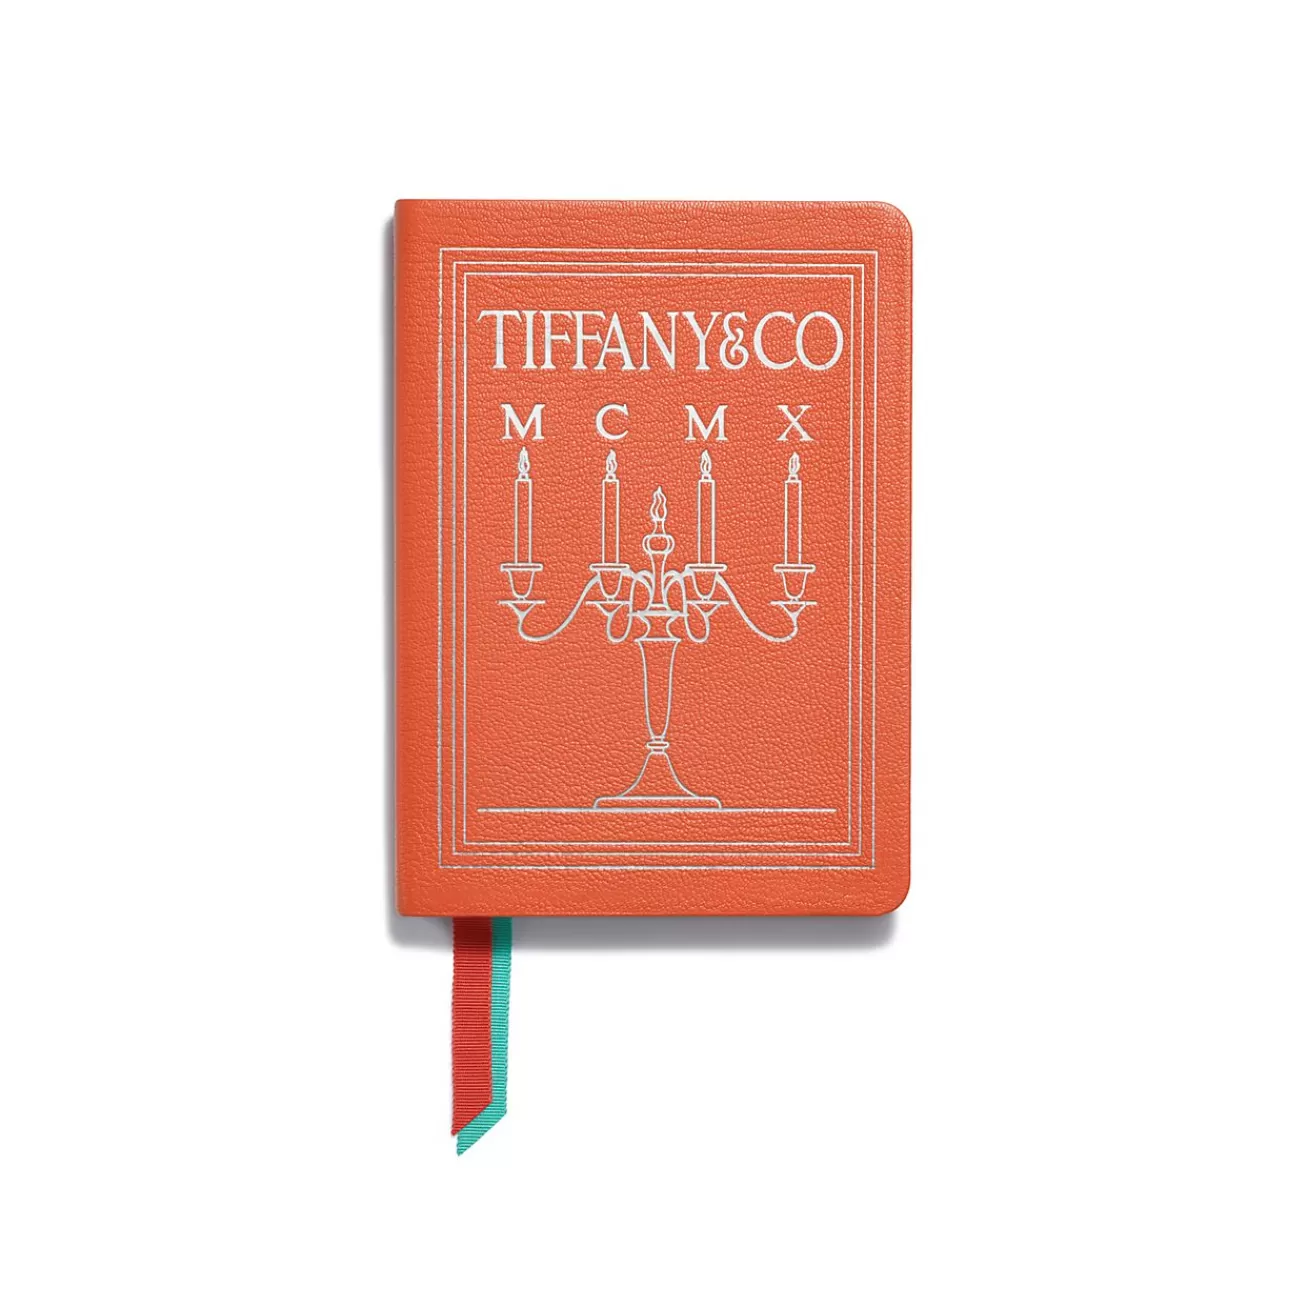 Tiffany & Co. Personal Essentials Notebook in Carnelian Orange Leather | ^ The Home | Housewarming Gifts